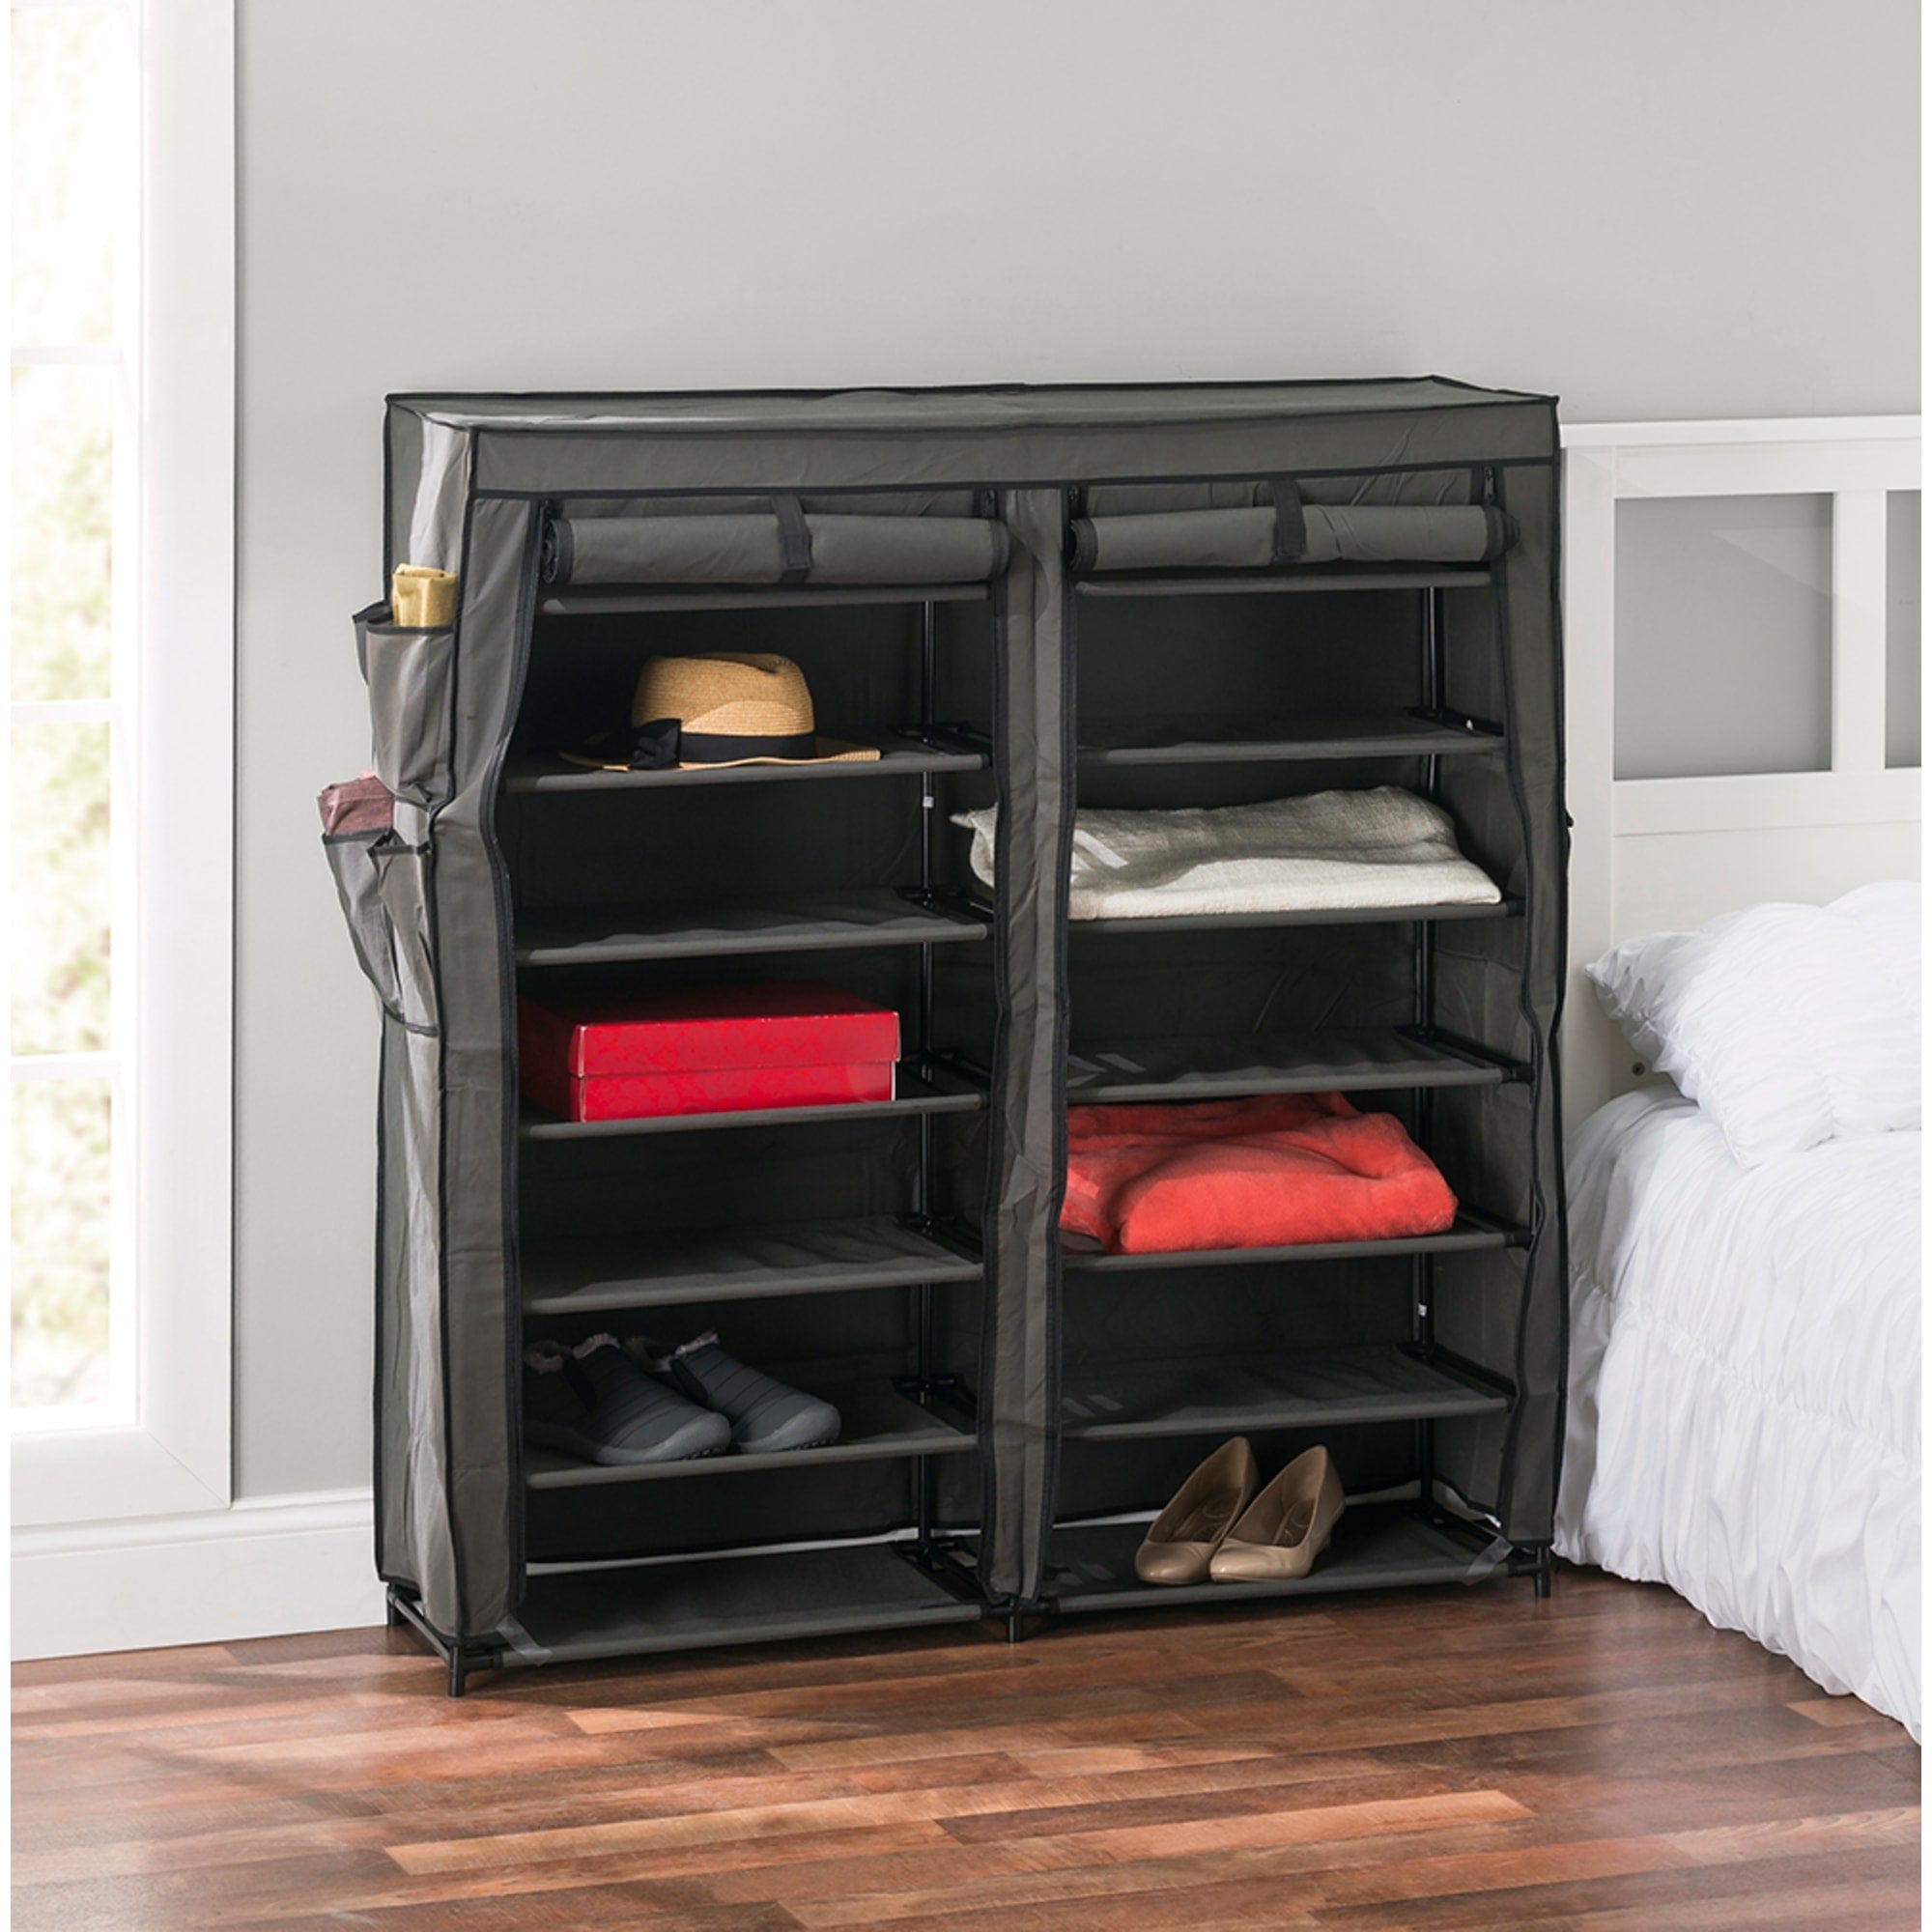 Home Basics  7 Tier Multi-Purpose Polyester Storage Shelf, Grey $25.00 EACH, CASE PACK OF 5